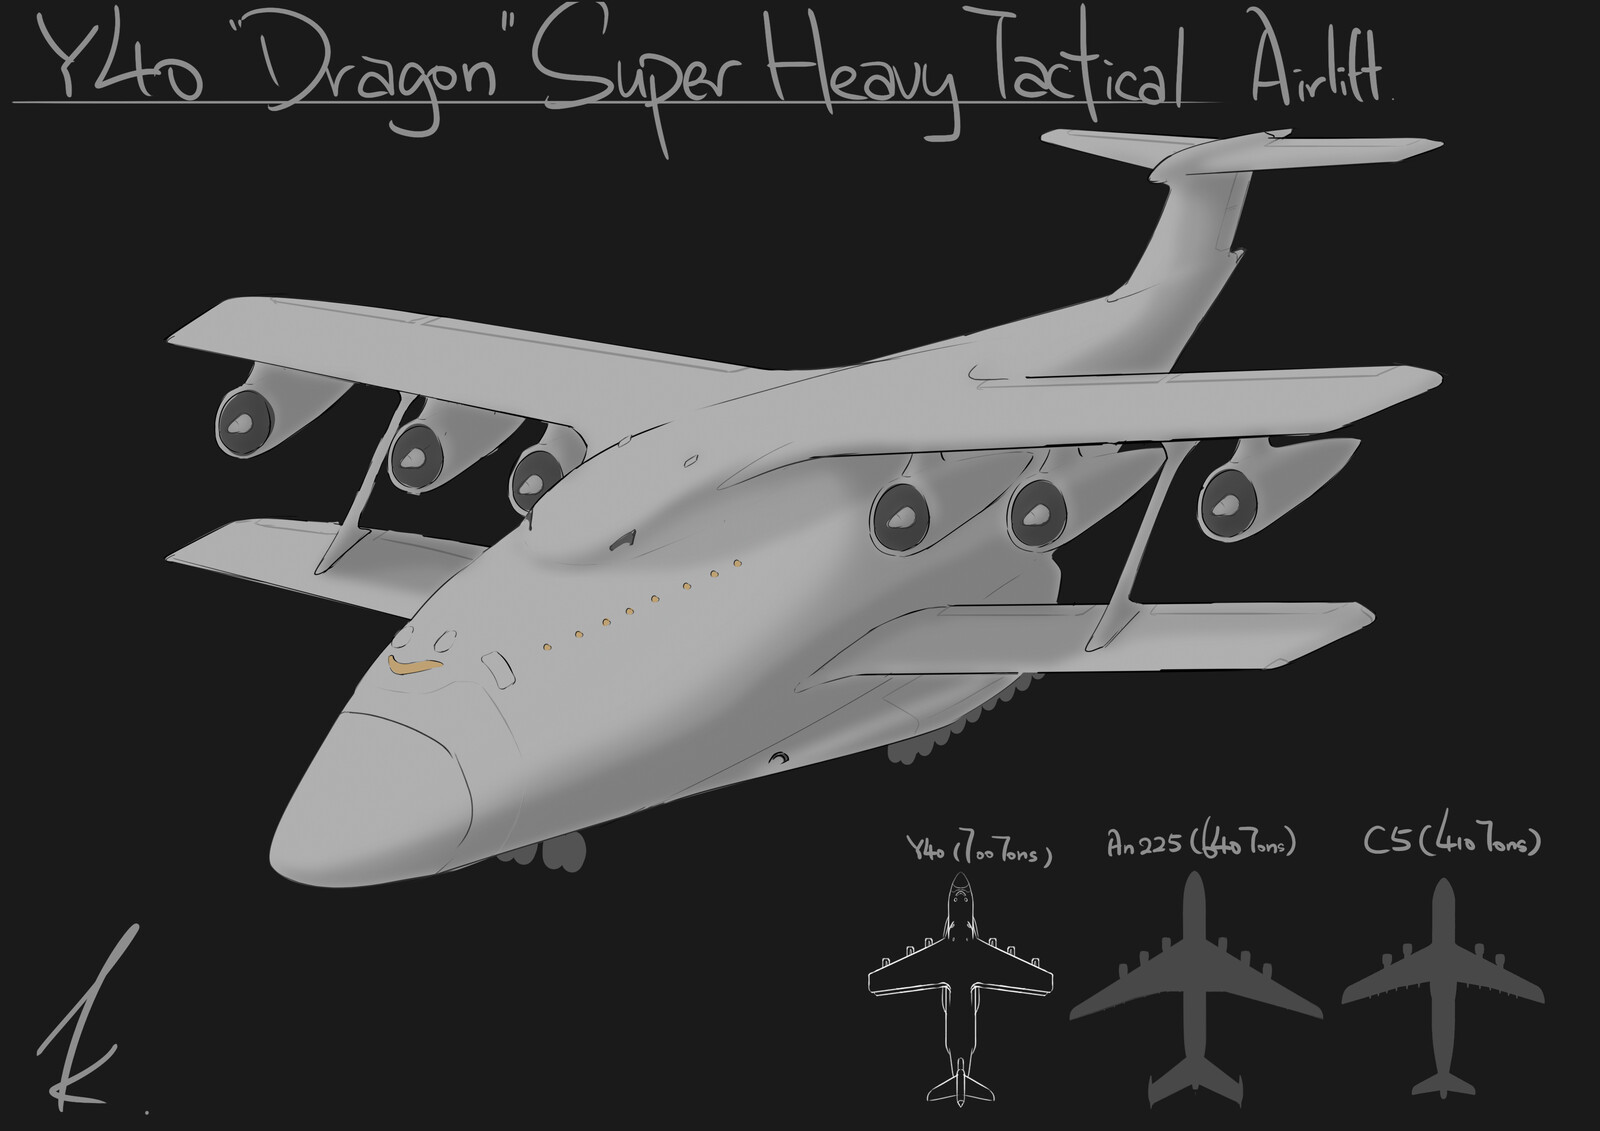 Y-40 "DRAGON" Super Heavy Tactical Airlift (Designed by KennethChan) 